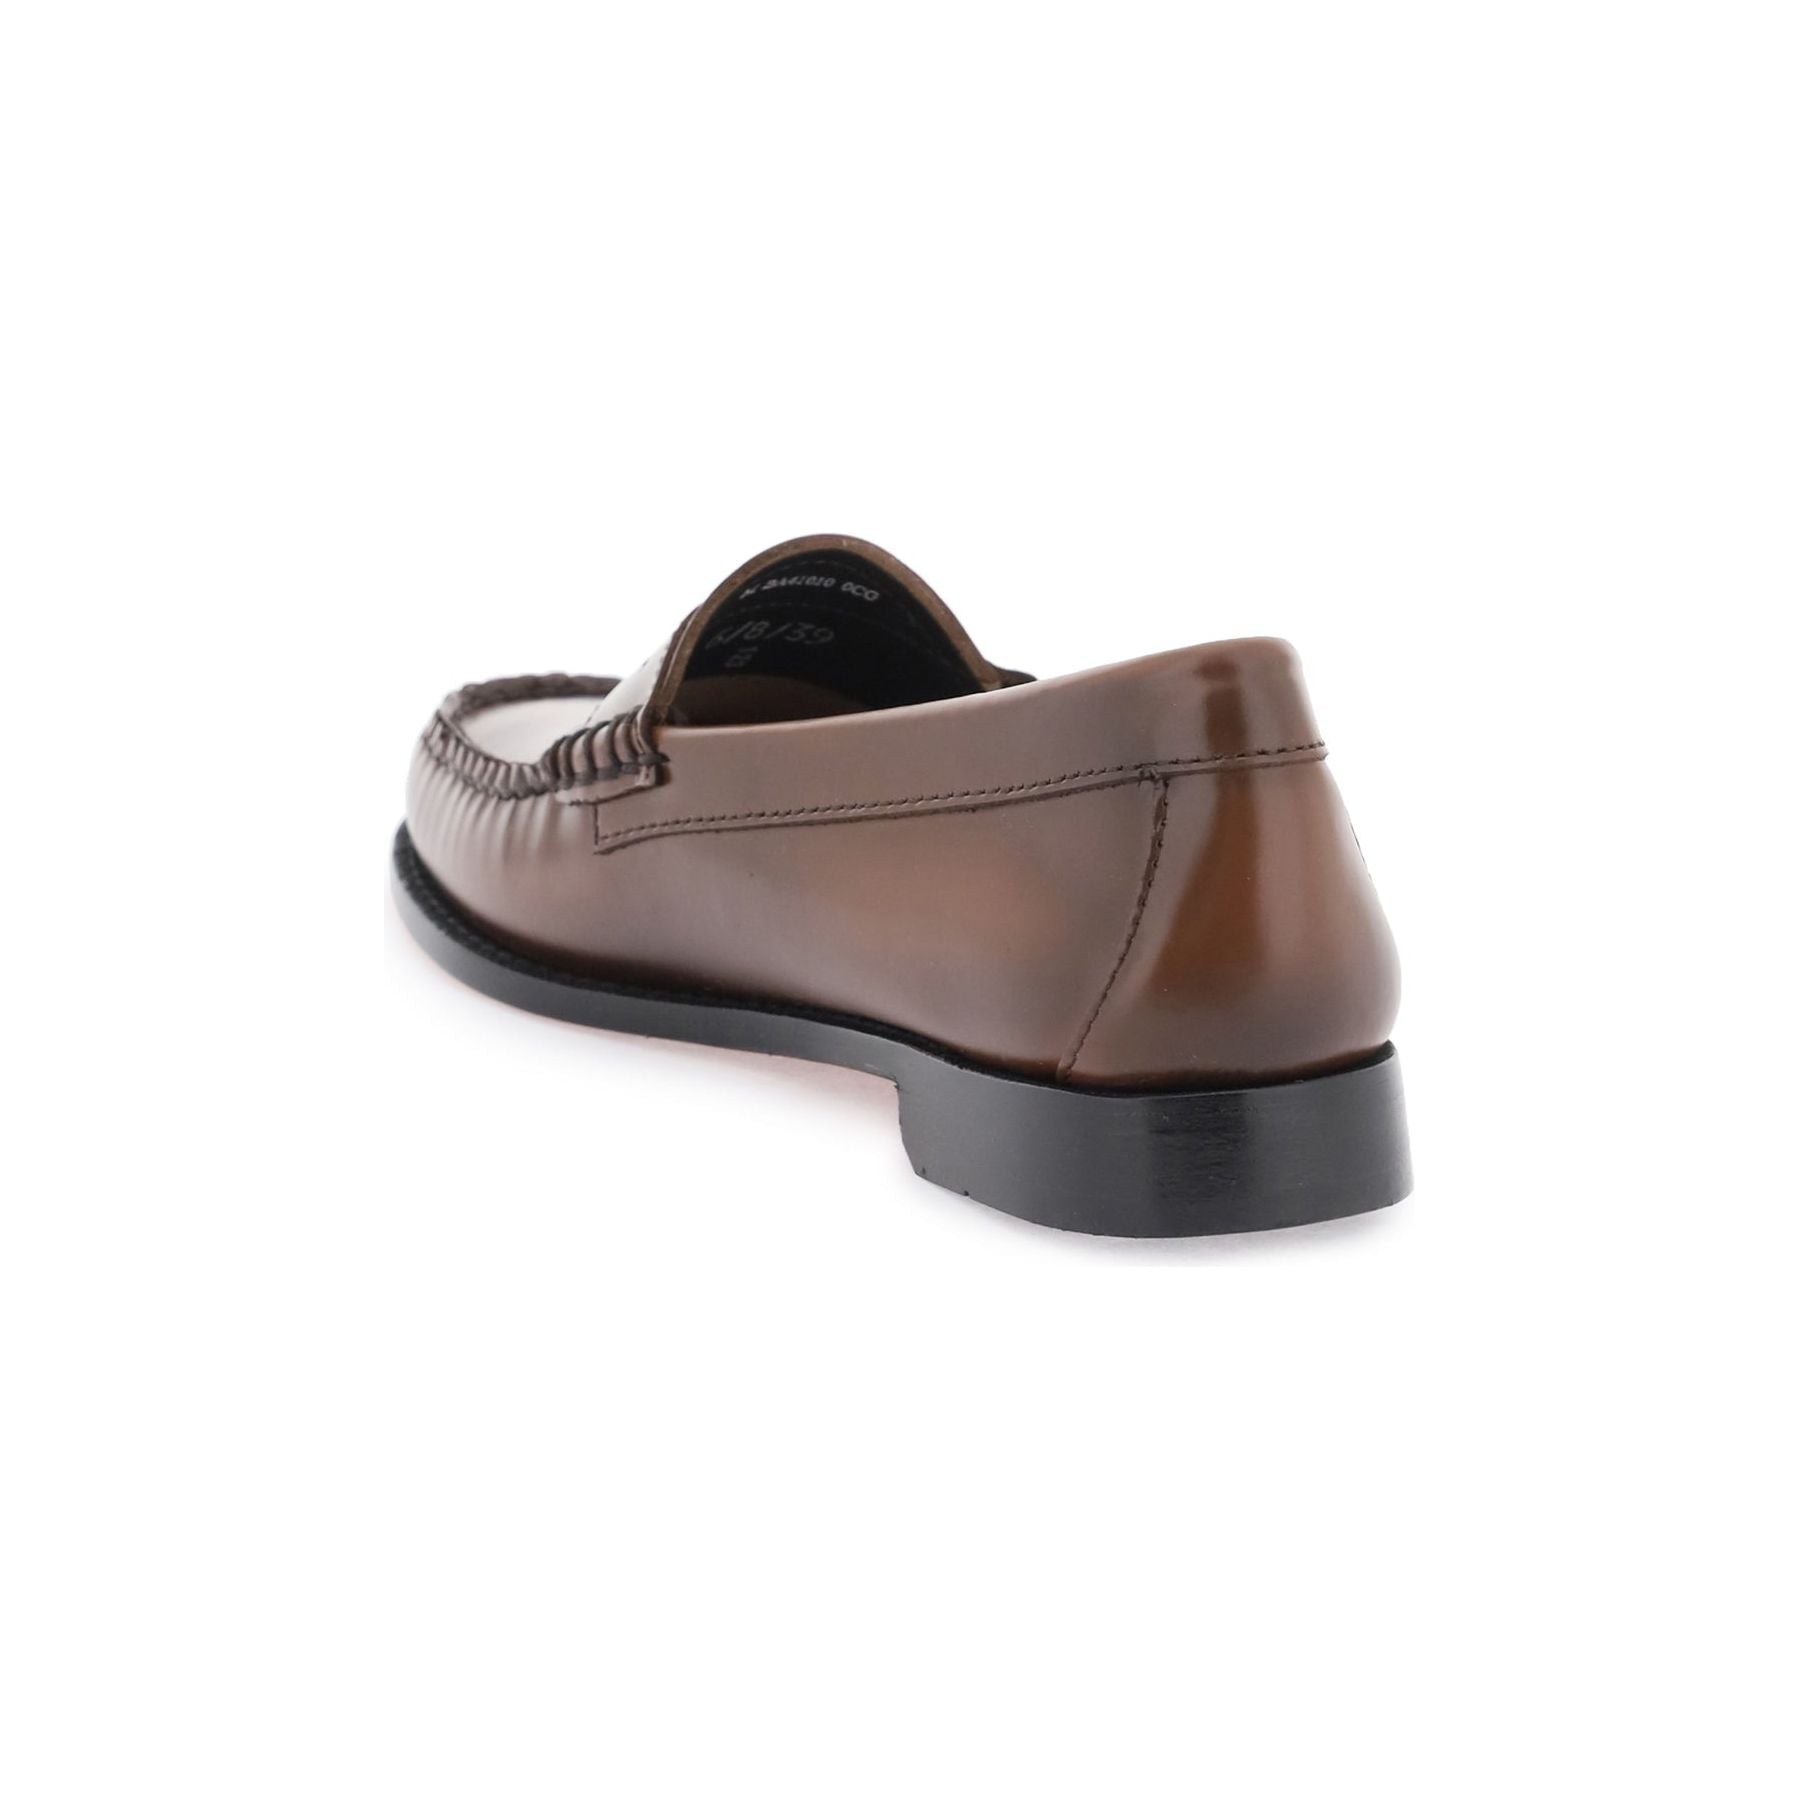 'Weejuns' Penny Loafers